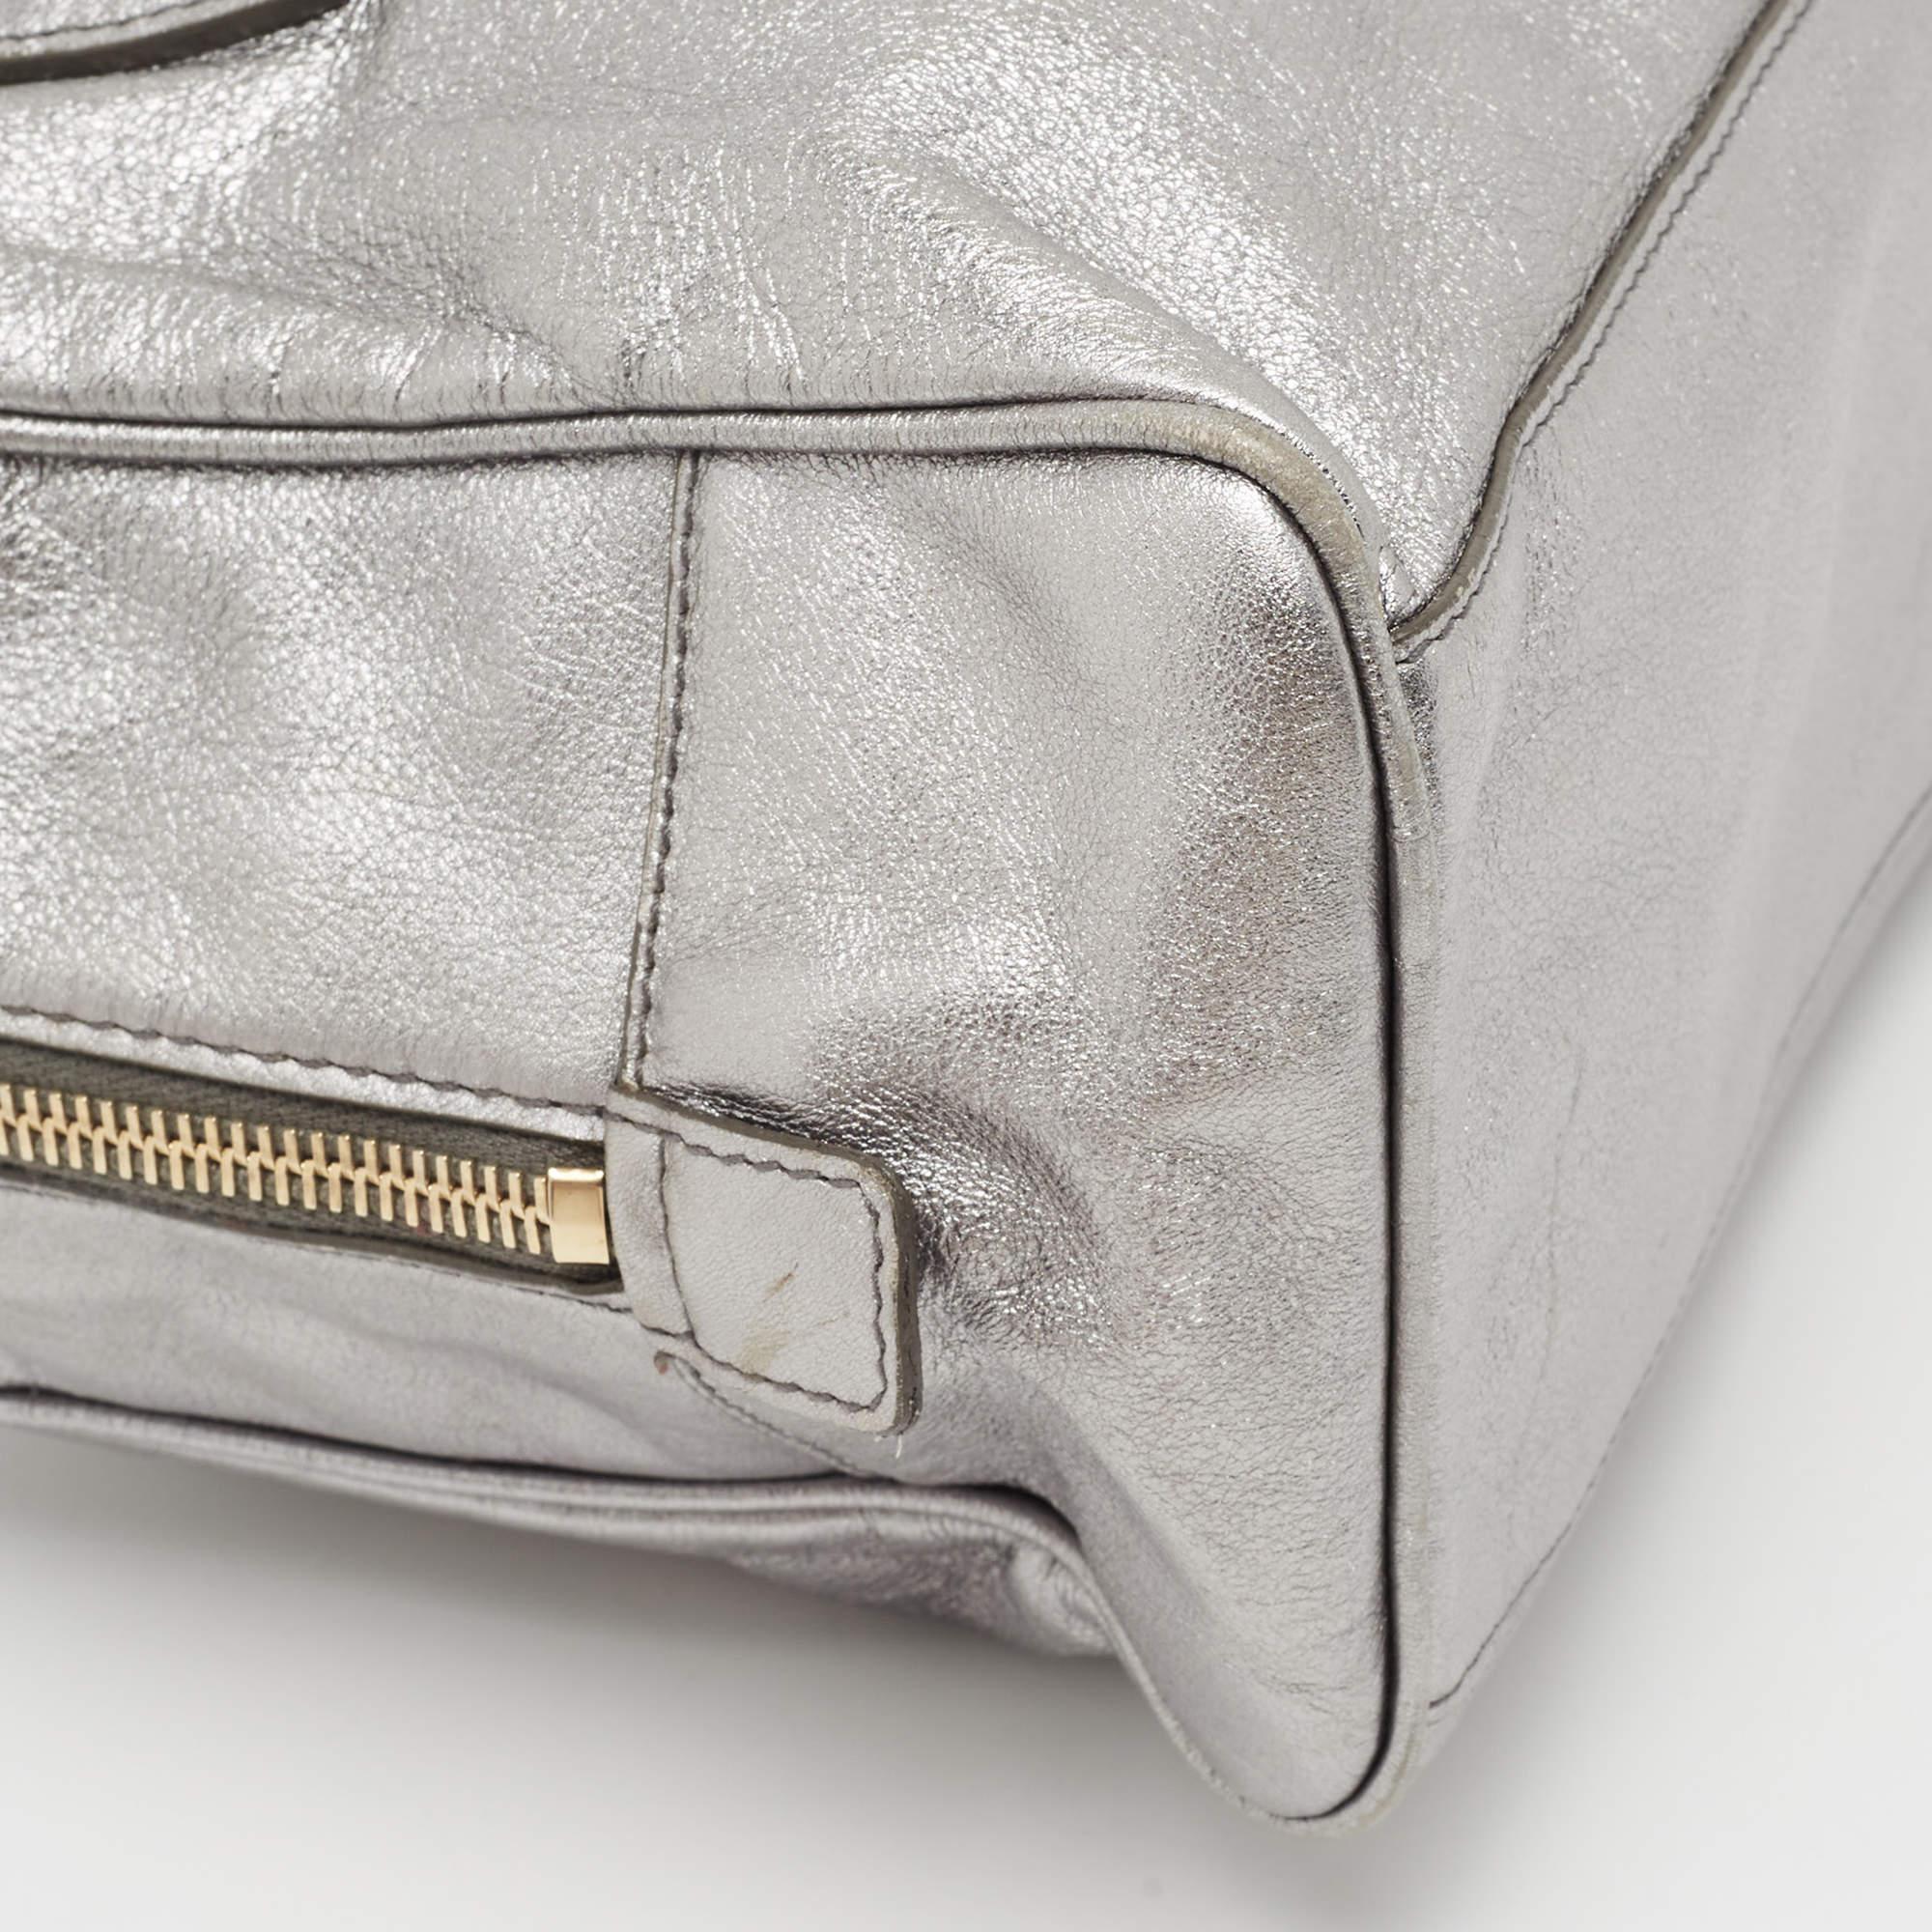 Yves Saint Laurent Silver Leather Y Mail Mini Bag 7